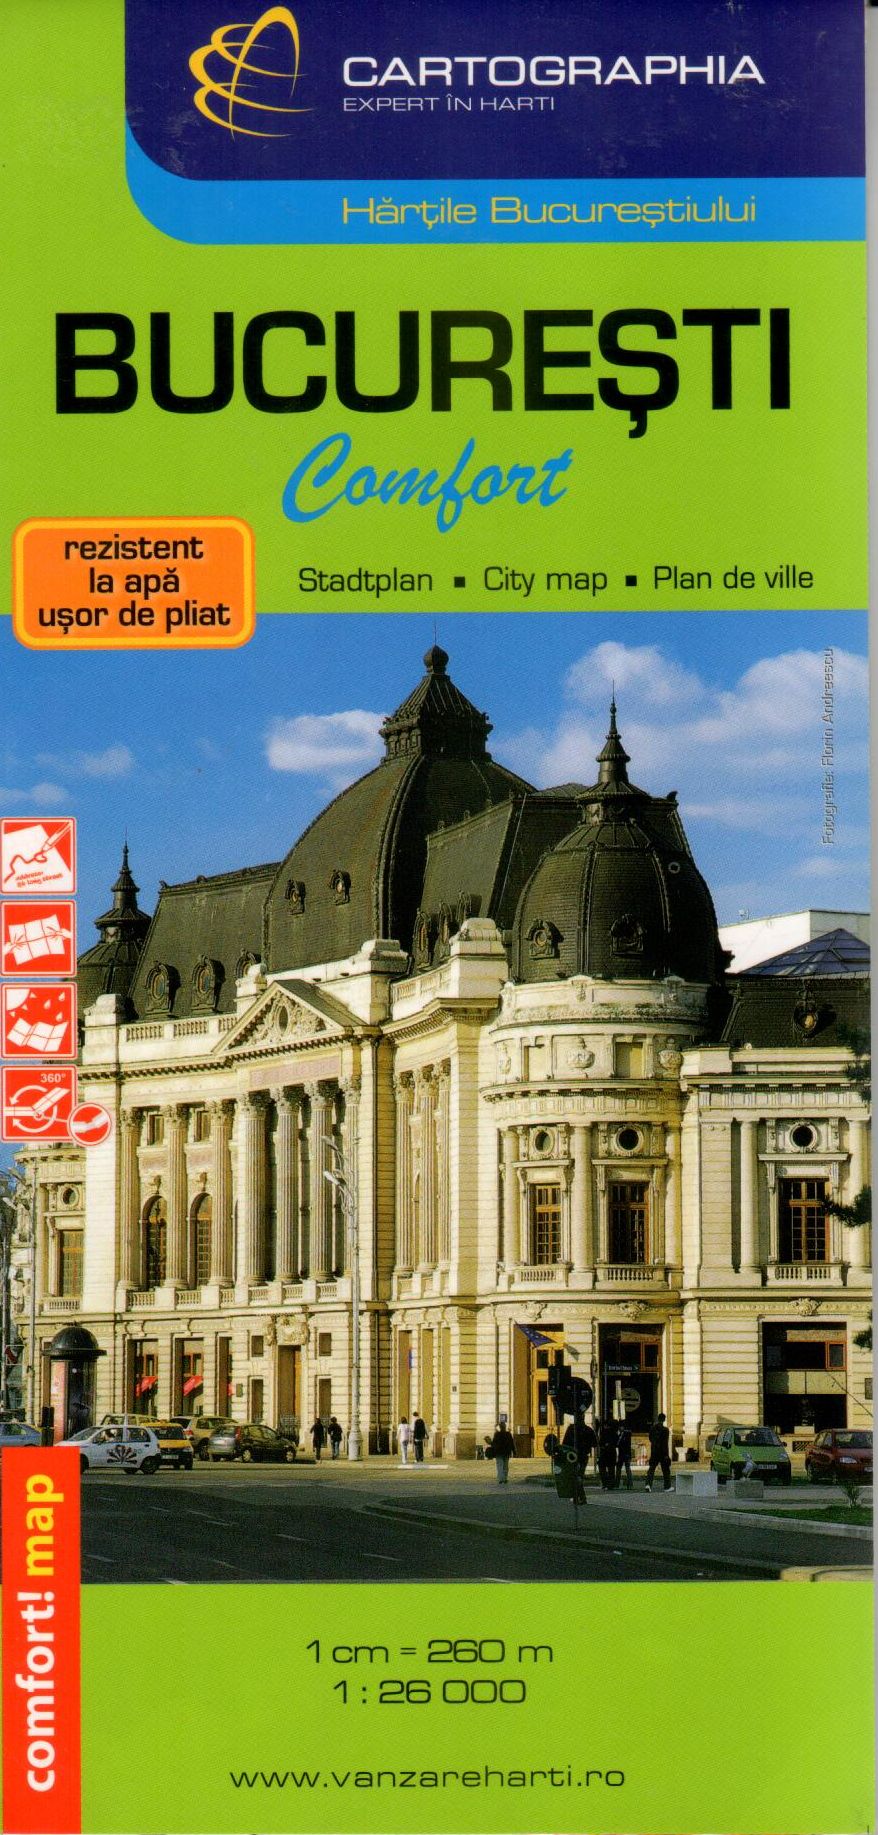 Easy to fold and waterproof laminated map Bucuresti comfort with street index and sights